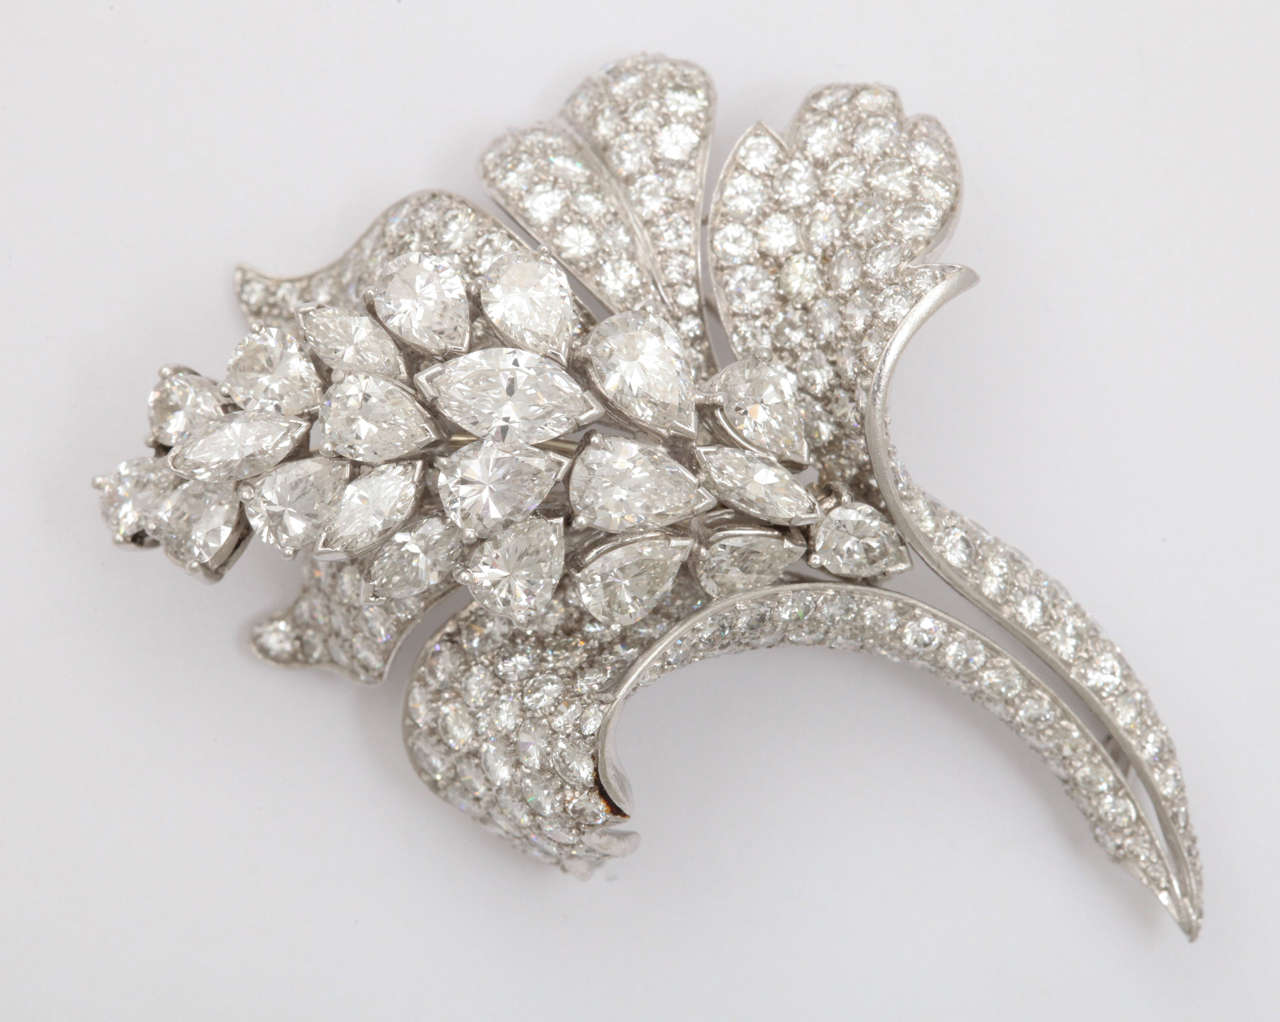 Contemporary Diamond Flower Brooch with 3 Interchangeable Centers